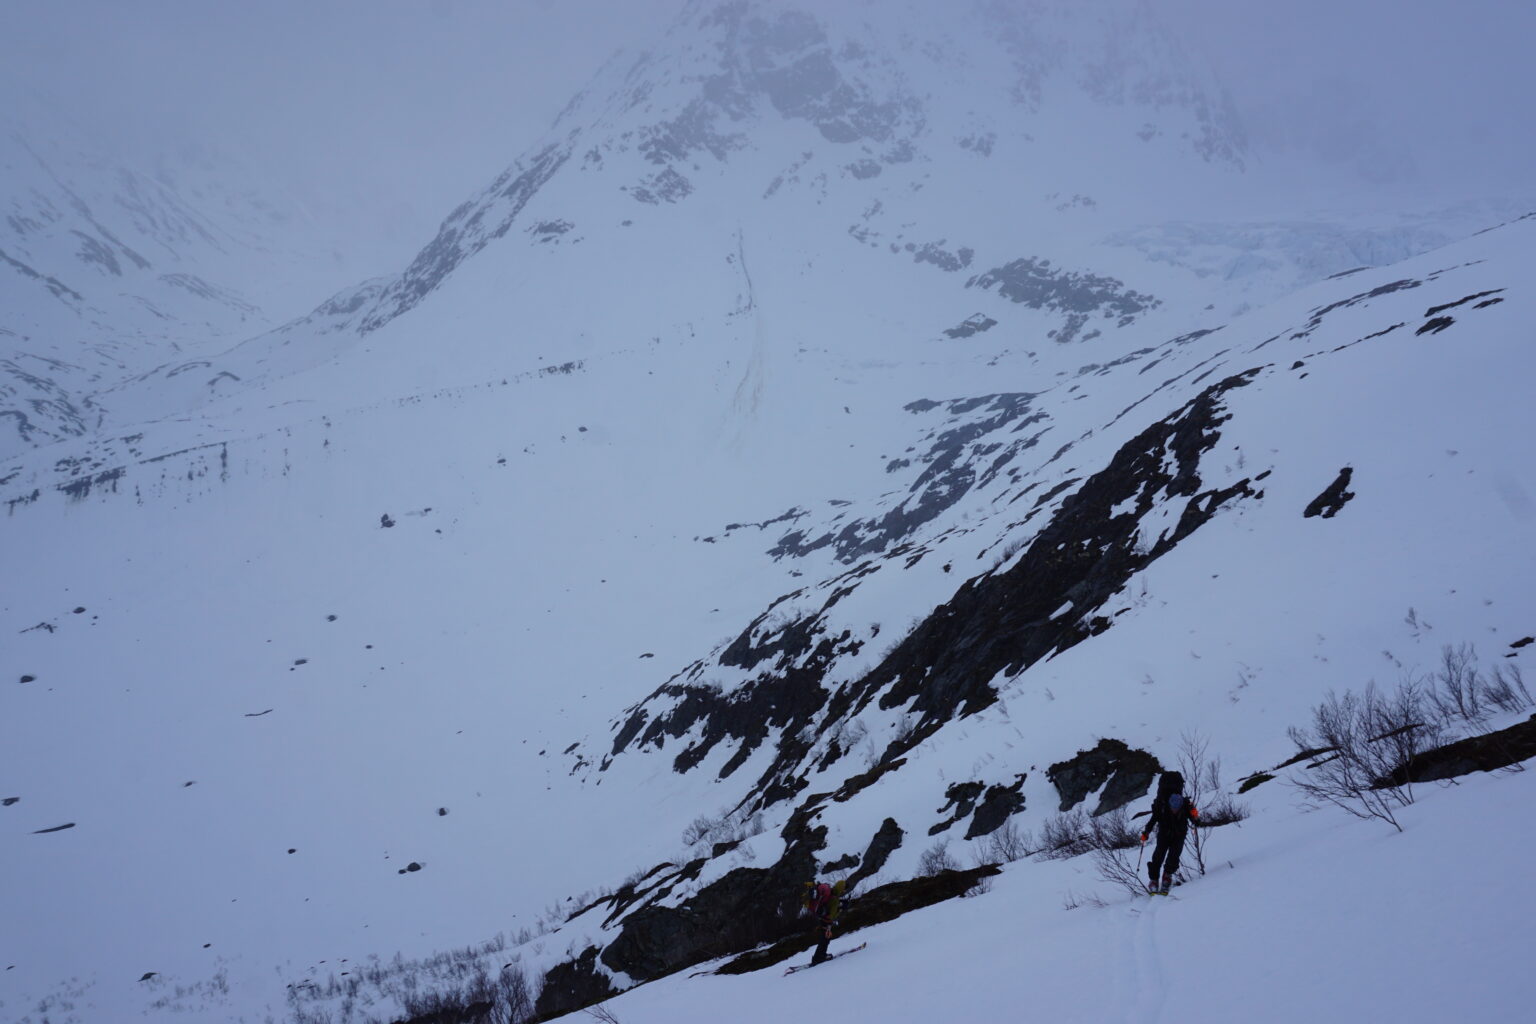 Heading through a low col on the Lyngen Alps Traverse